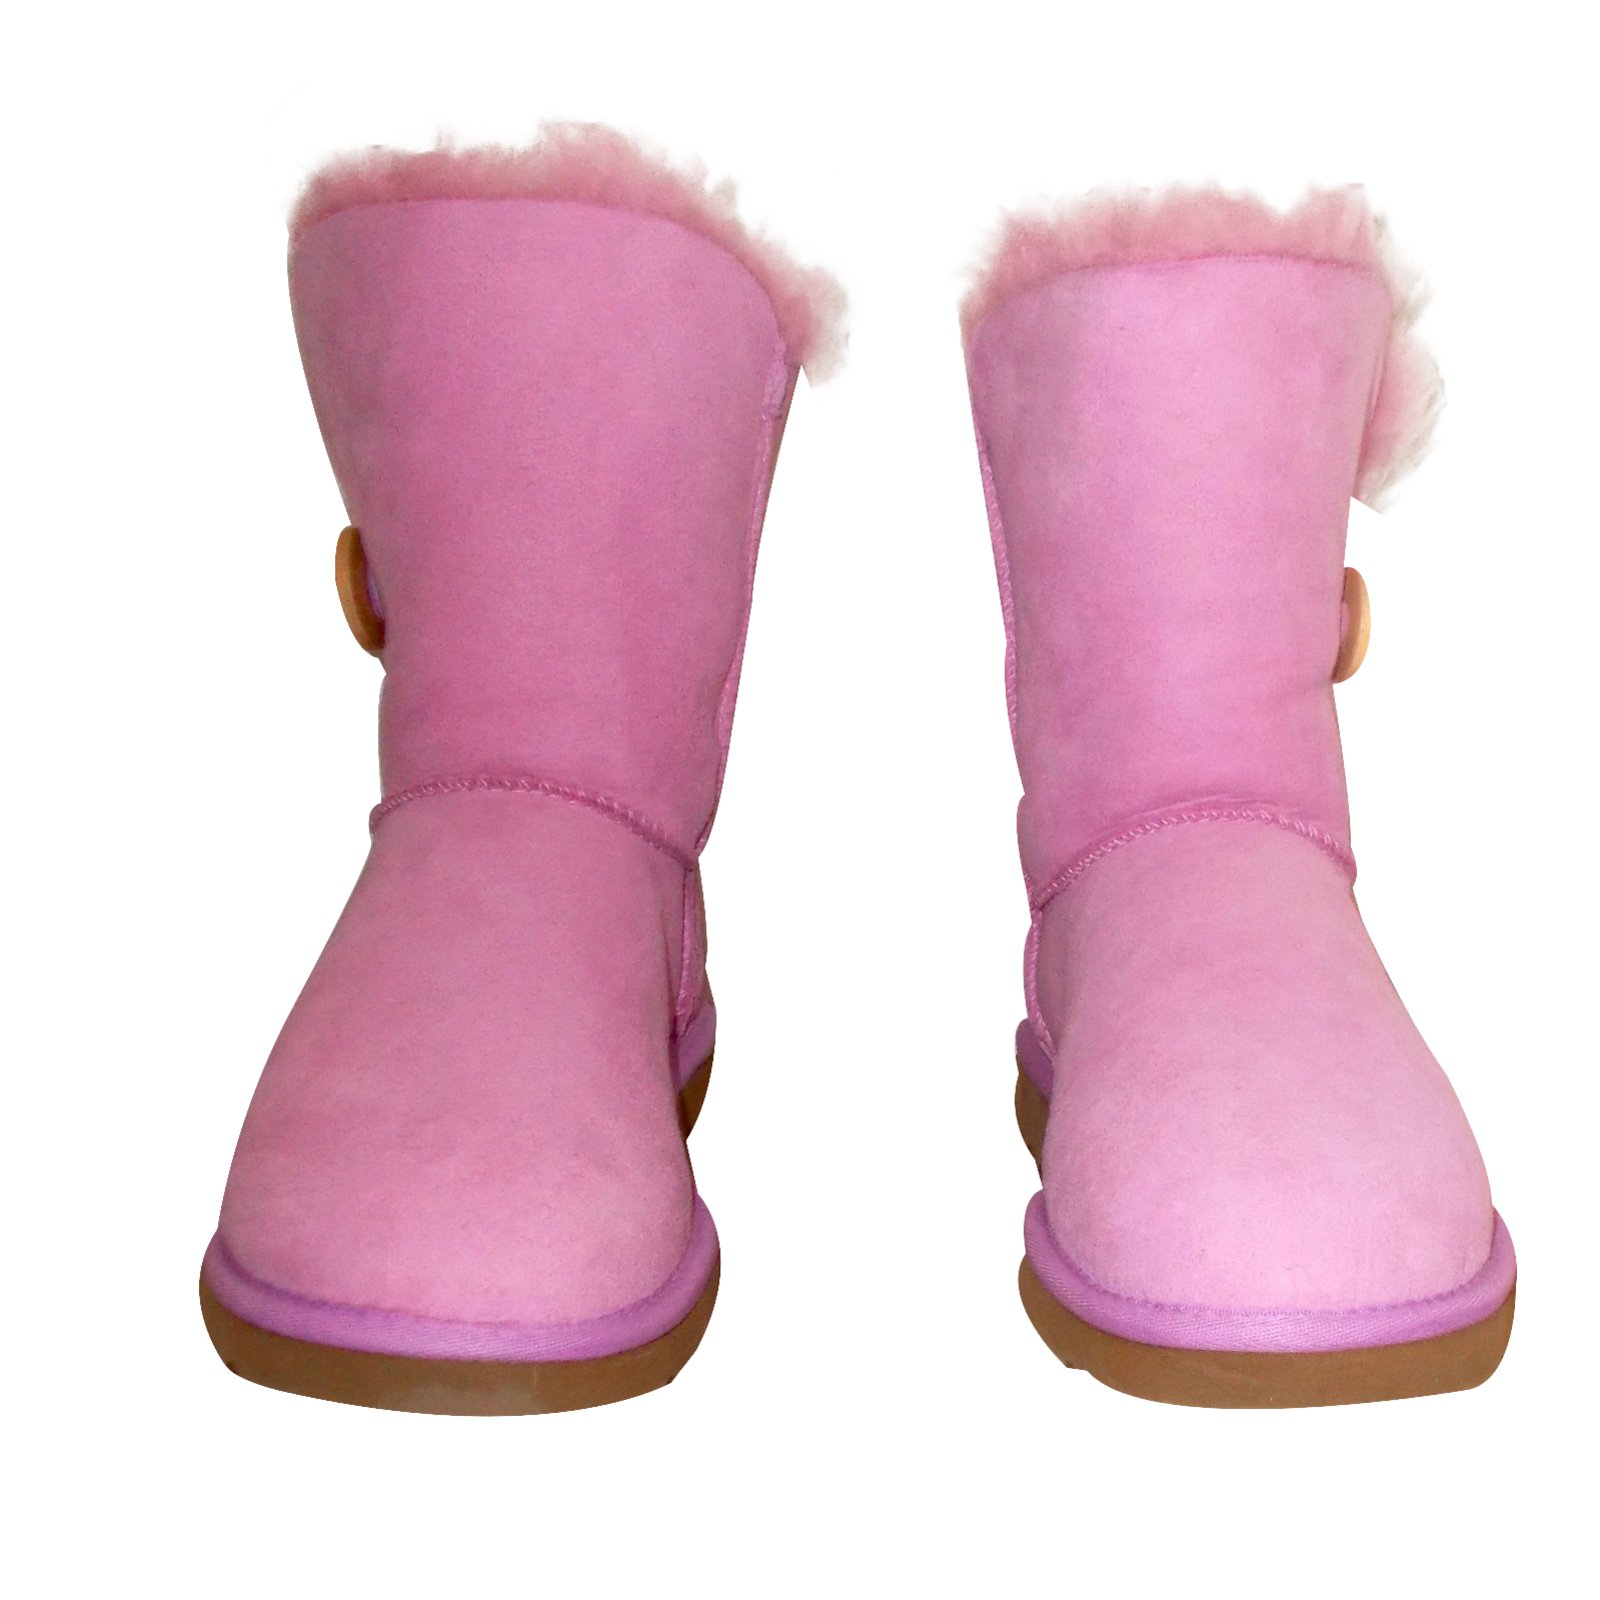 pink ugg boots with fur